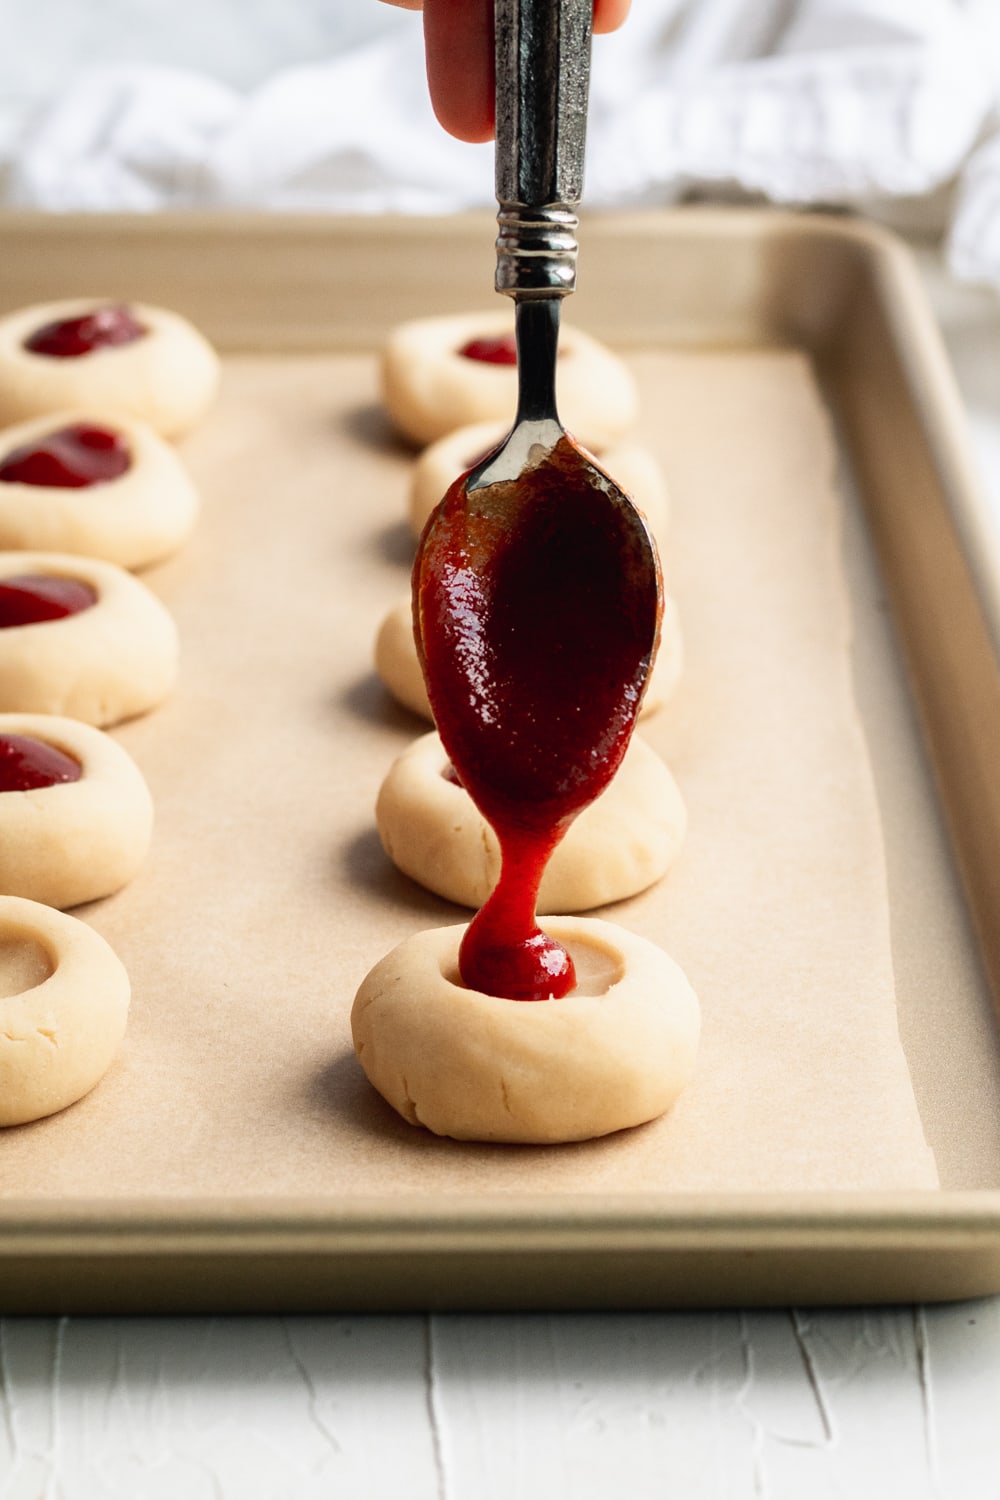 buttery thumbprint cookies being filled with guava jam